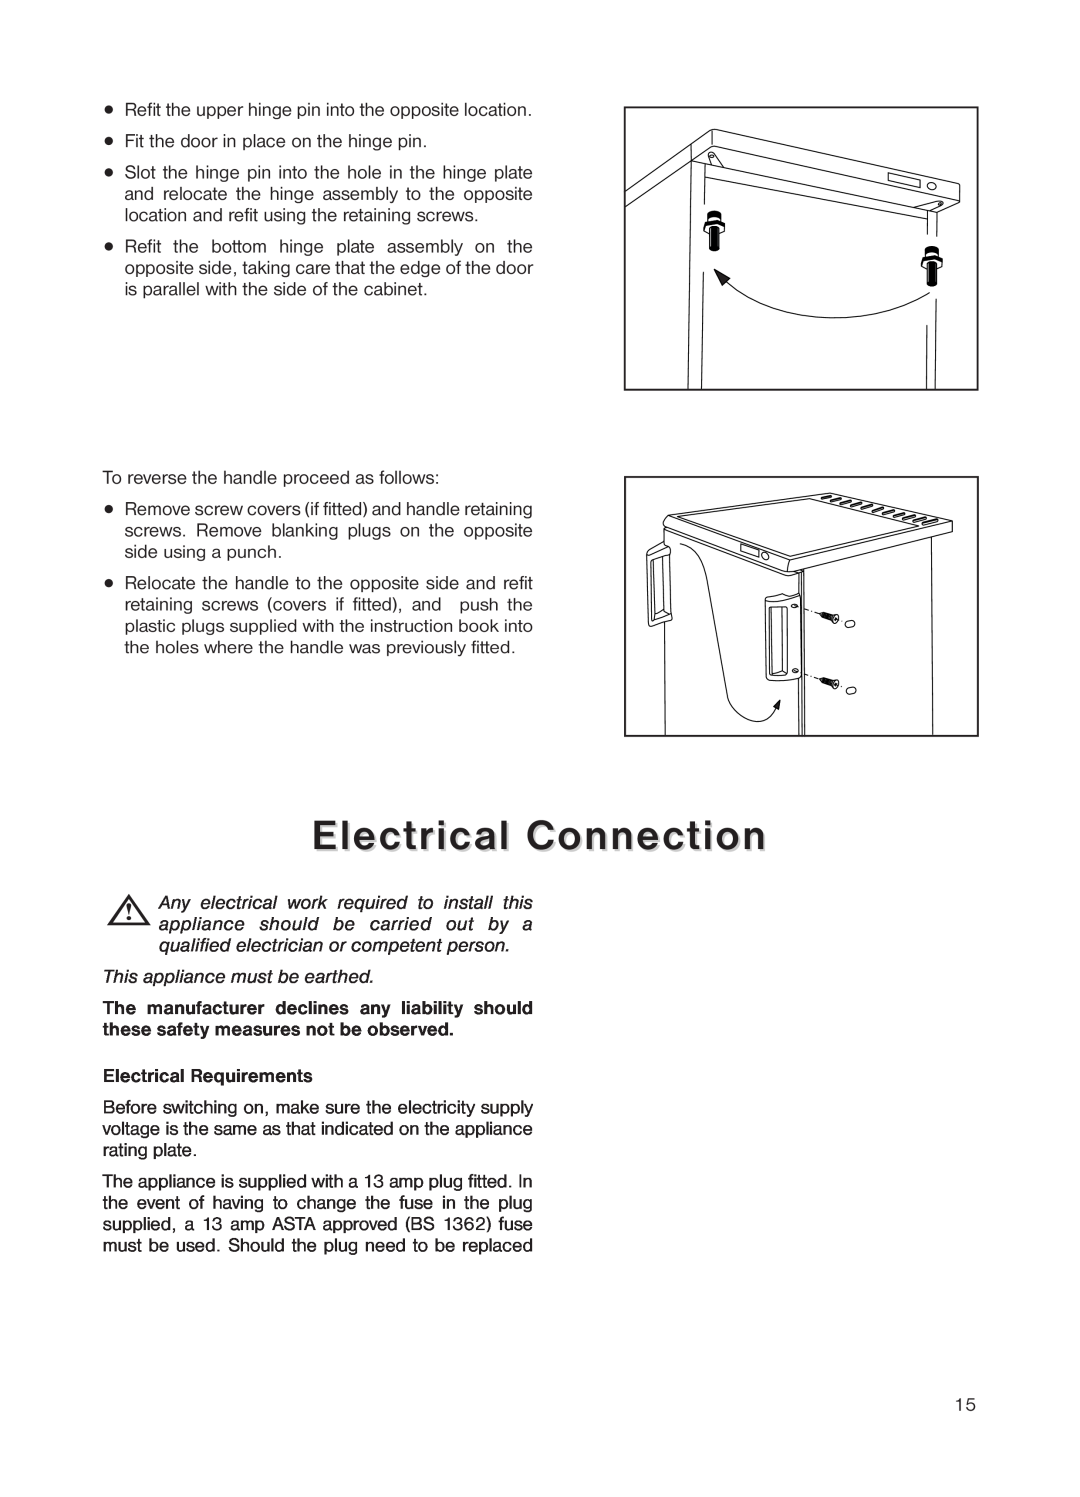 Zanussi ZEUT 6245 manual Electrical Connection, This appliance must be earthed, Electrical Requirements 